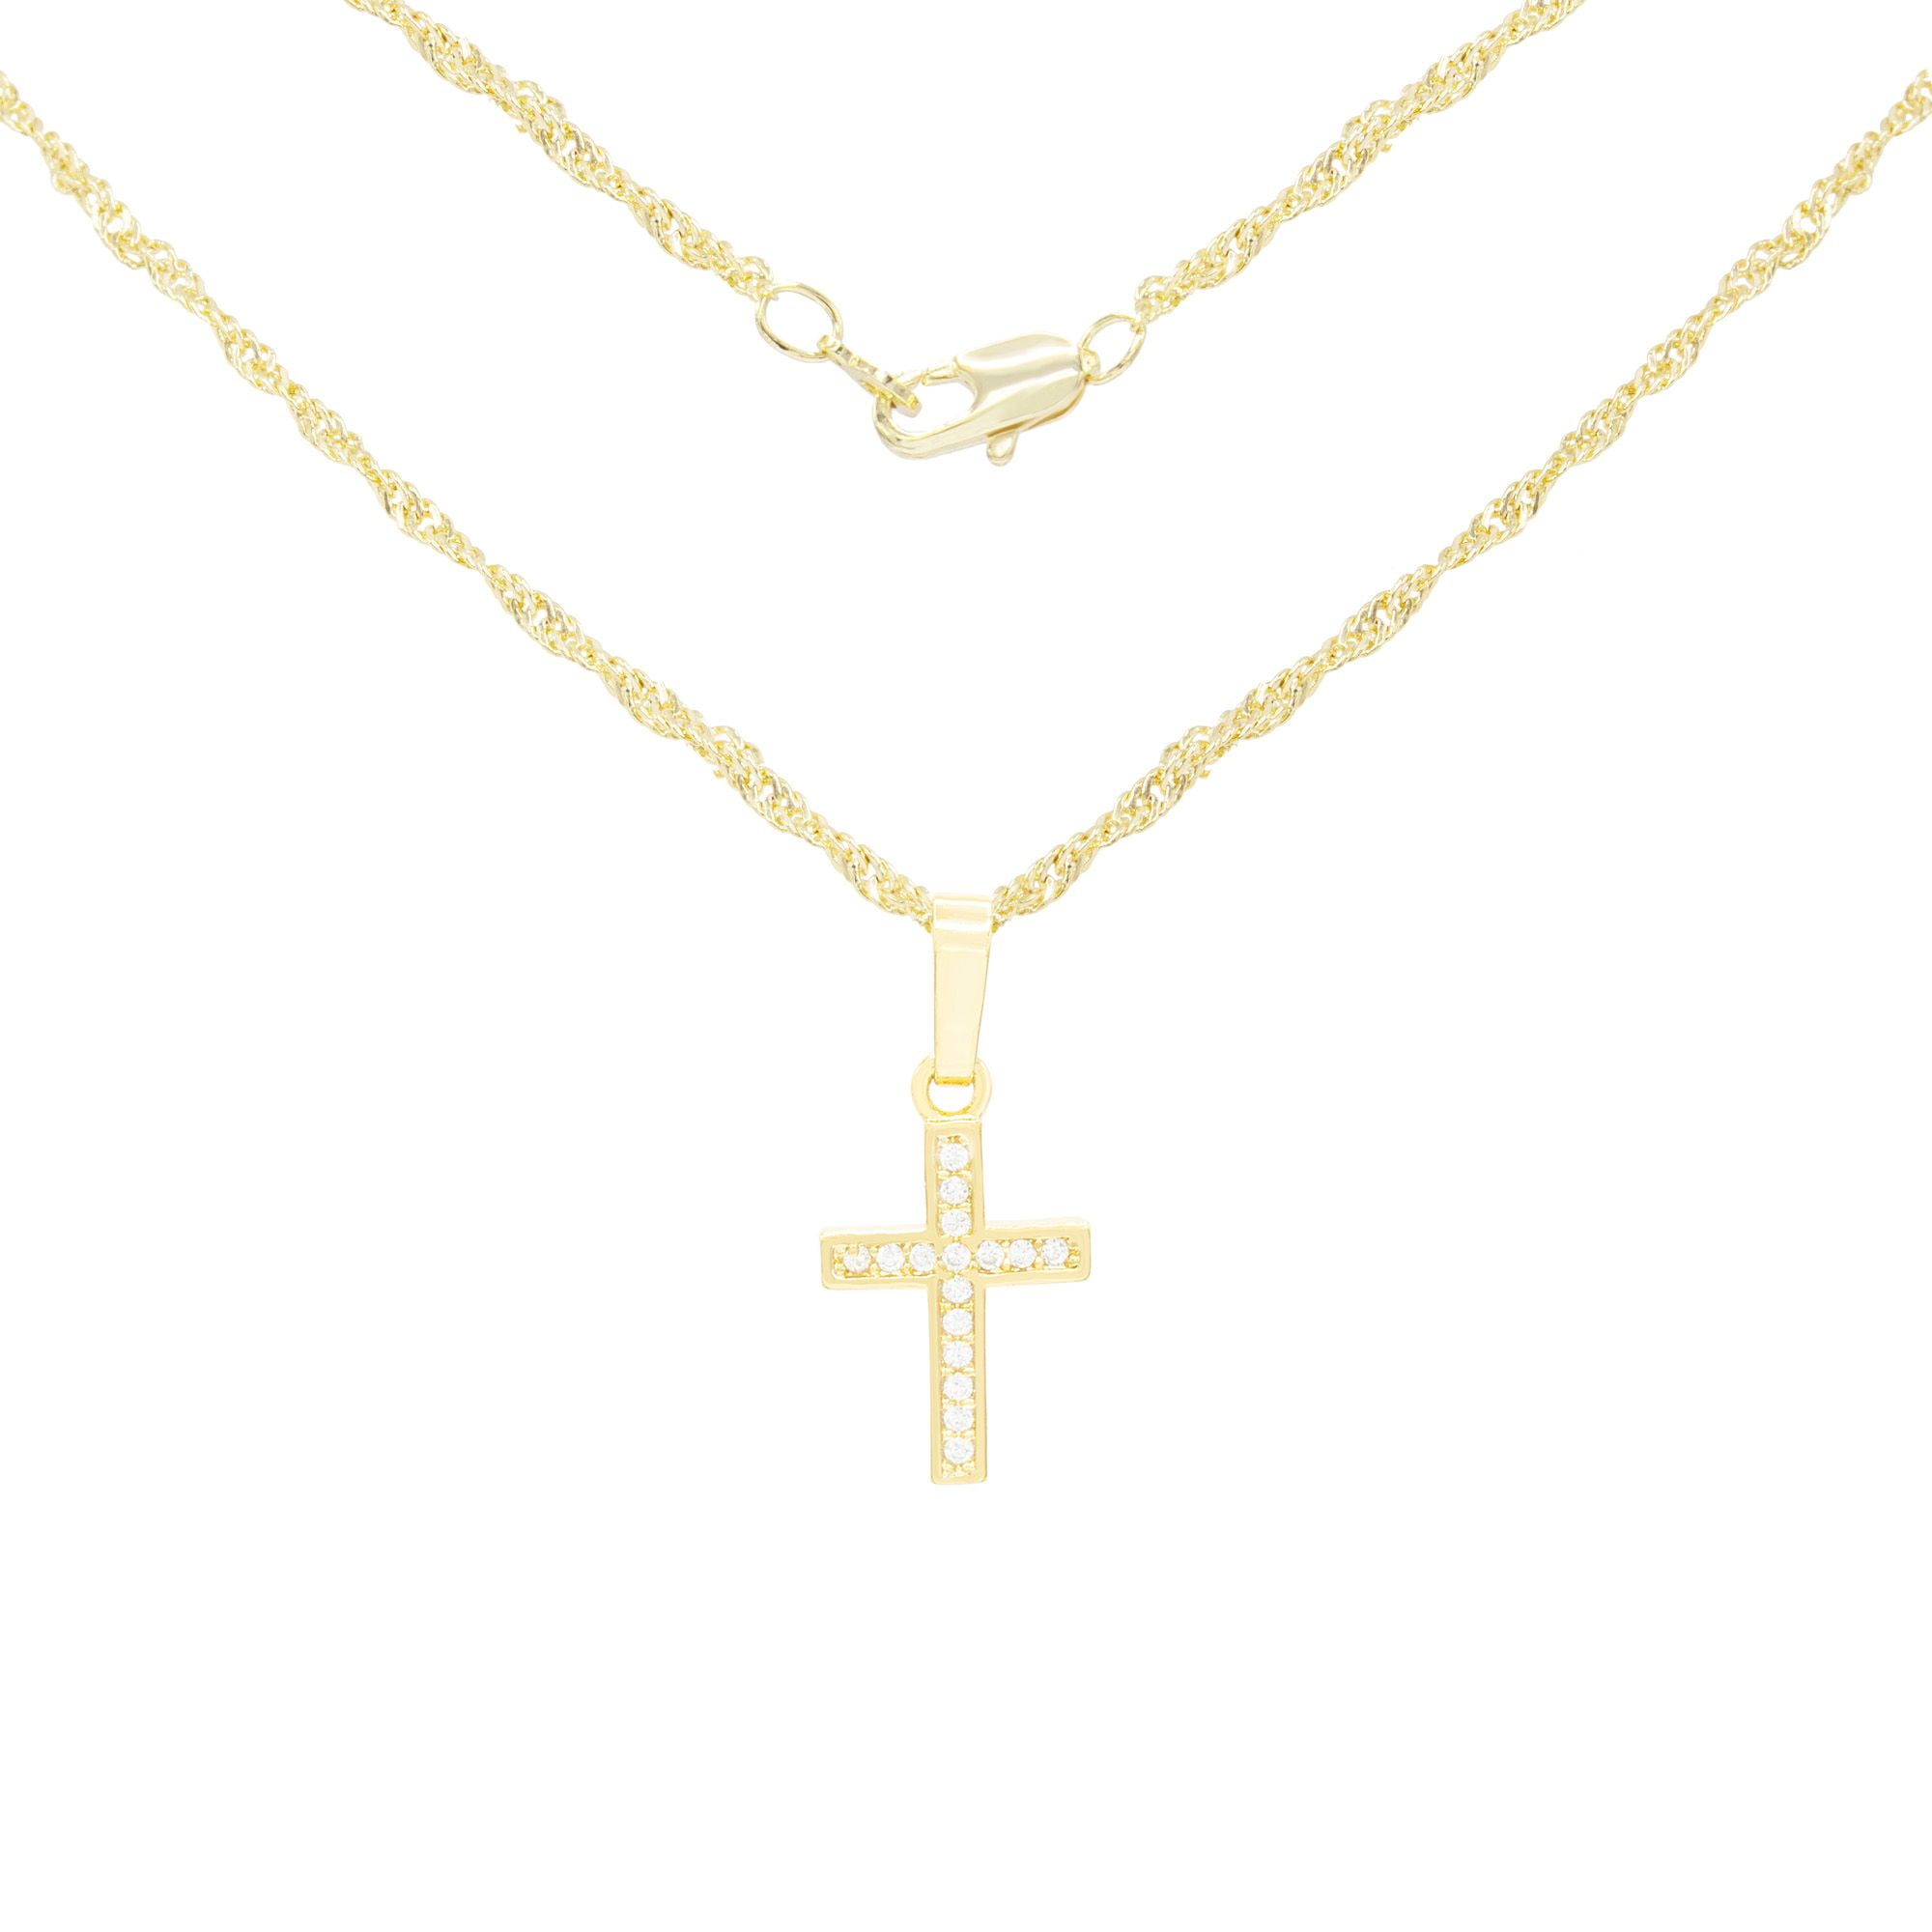 BEBERLINI Cross Pendant 14K Gold Filled 18" Necklace Set Rope Chain 2.2 mm Cubic Zirconia Charm Jewelry for Women Adult Female Girl Brass